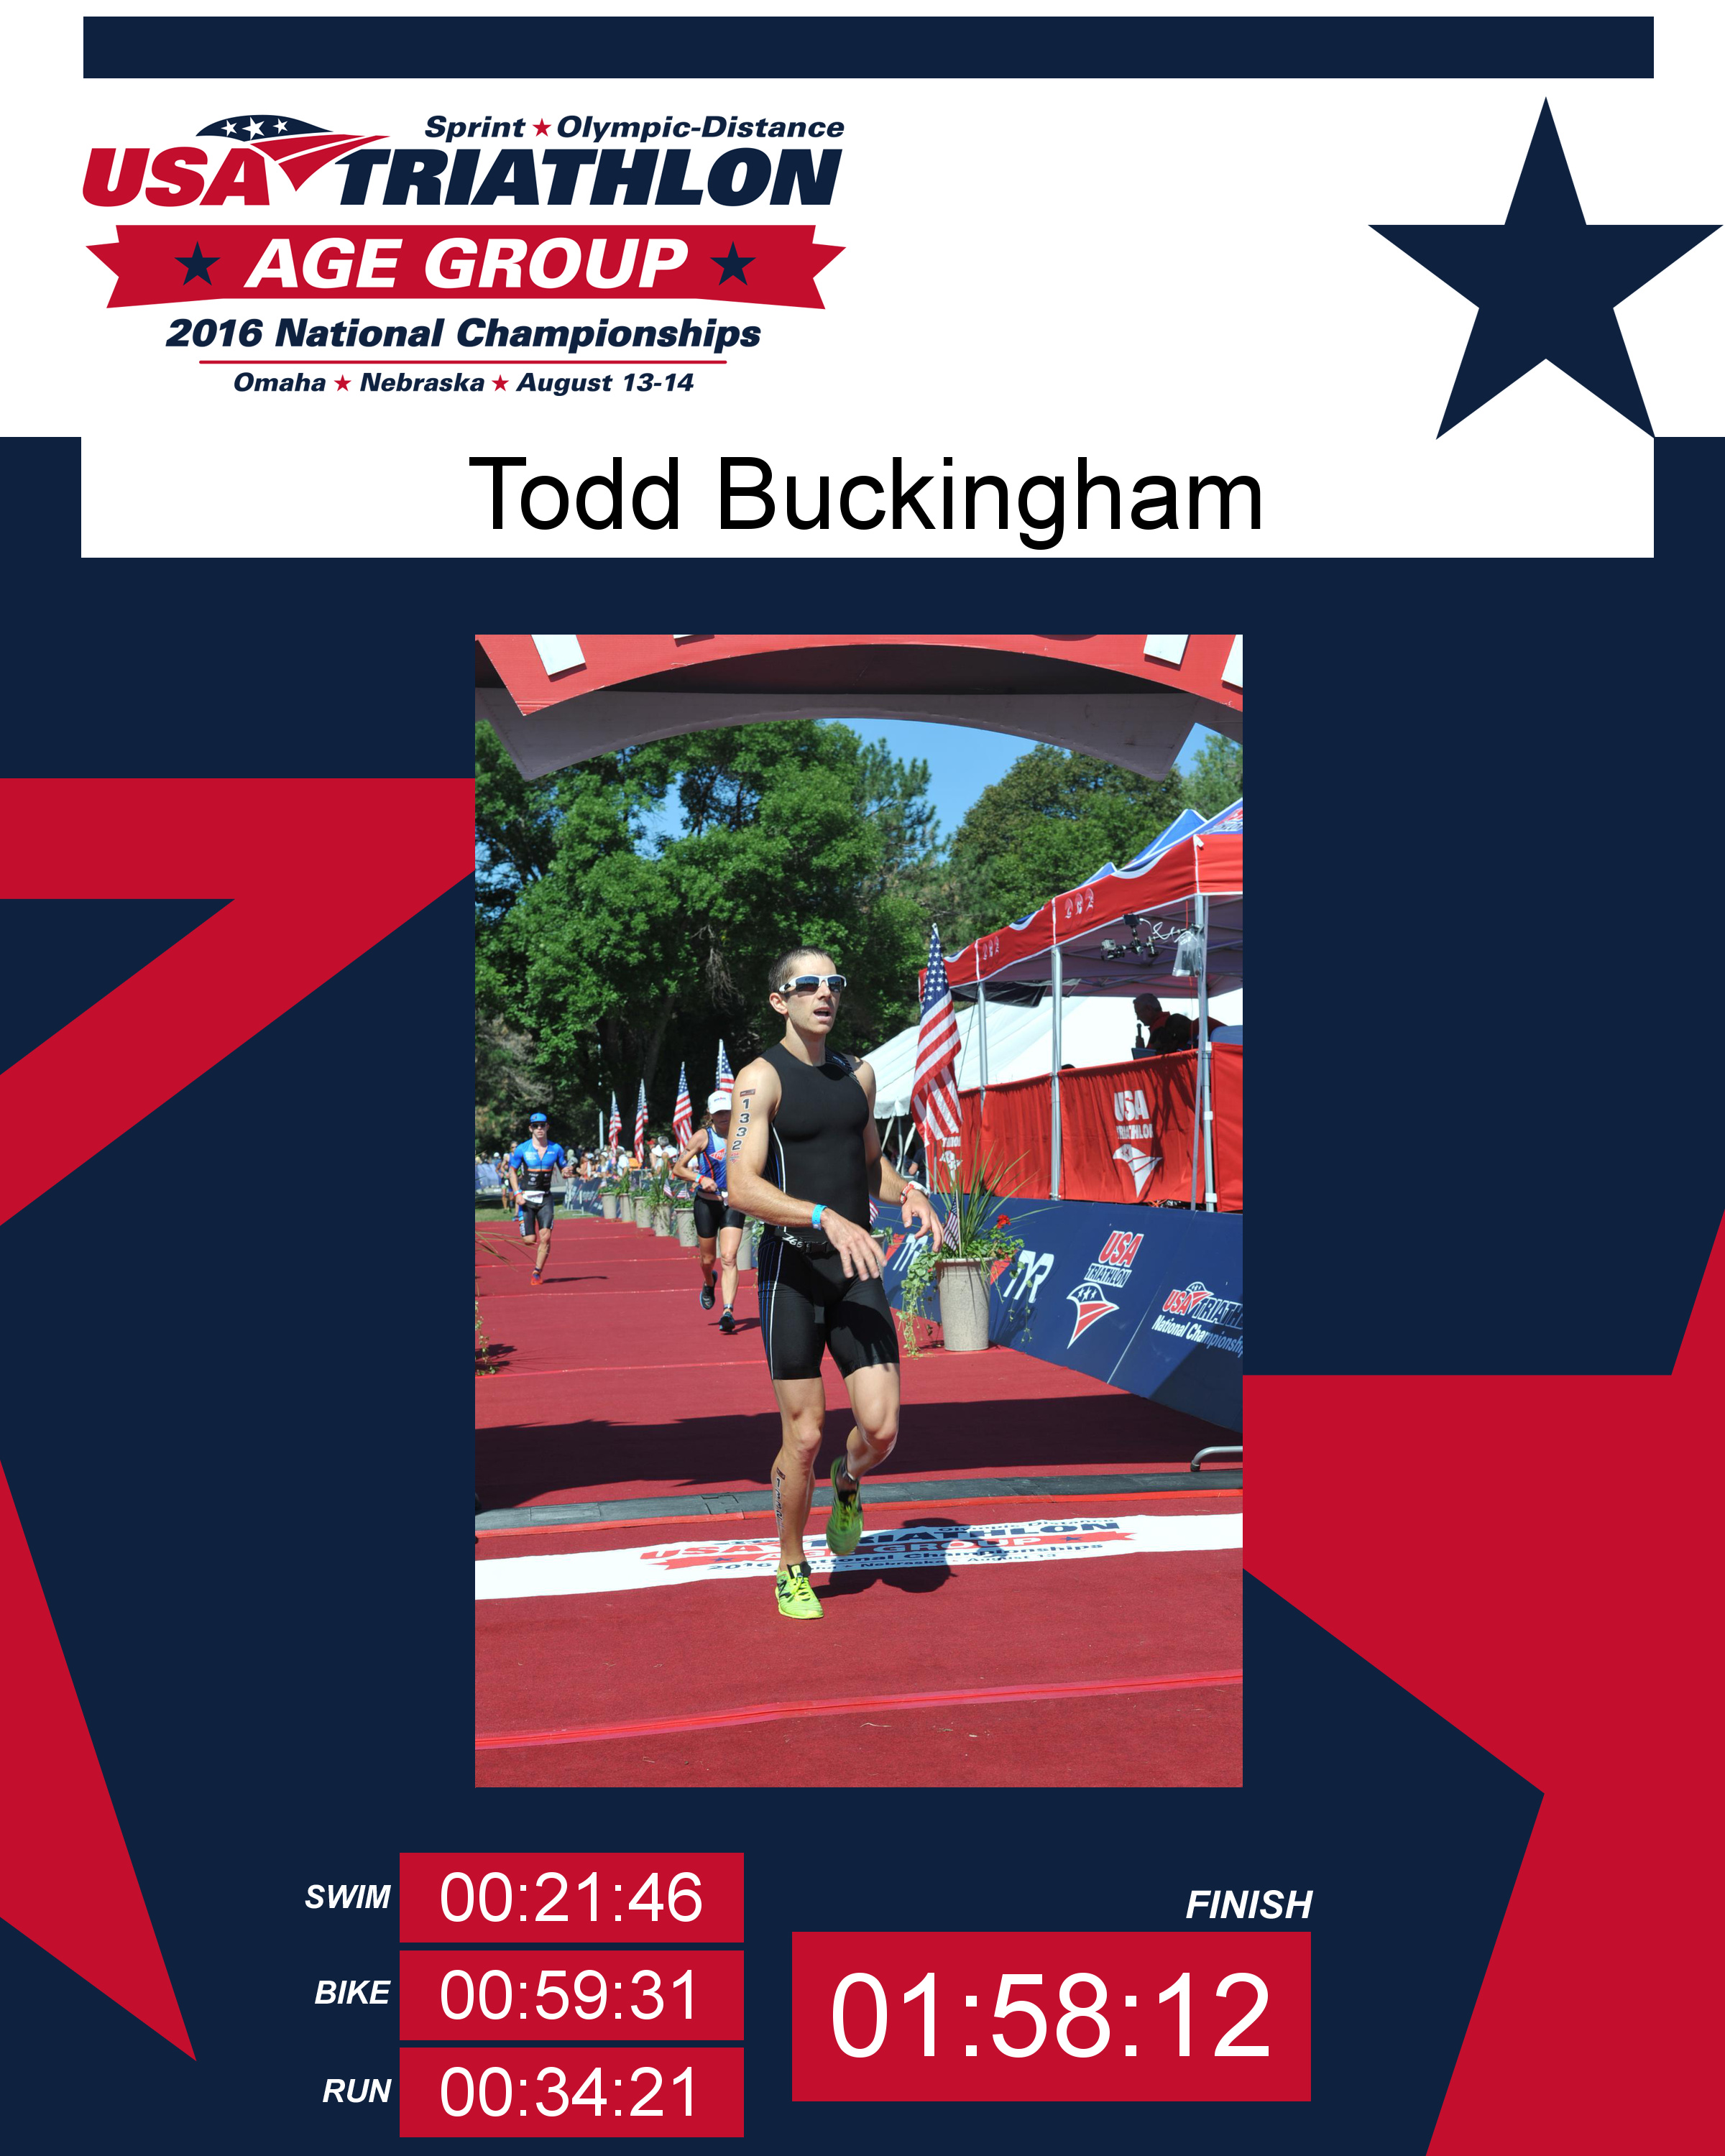 The Aftermath of the USA Triathlon Age Group National Championship — Todd Buckingham Adult Pic Hq